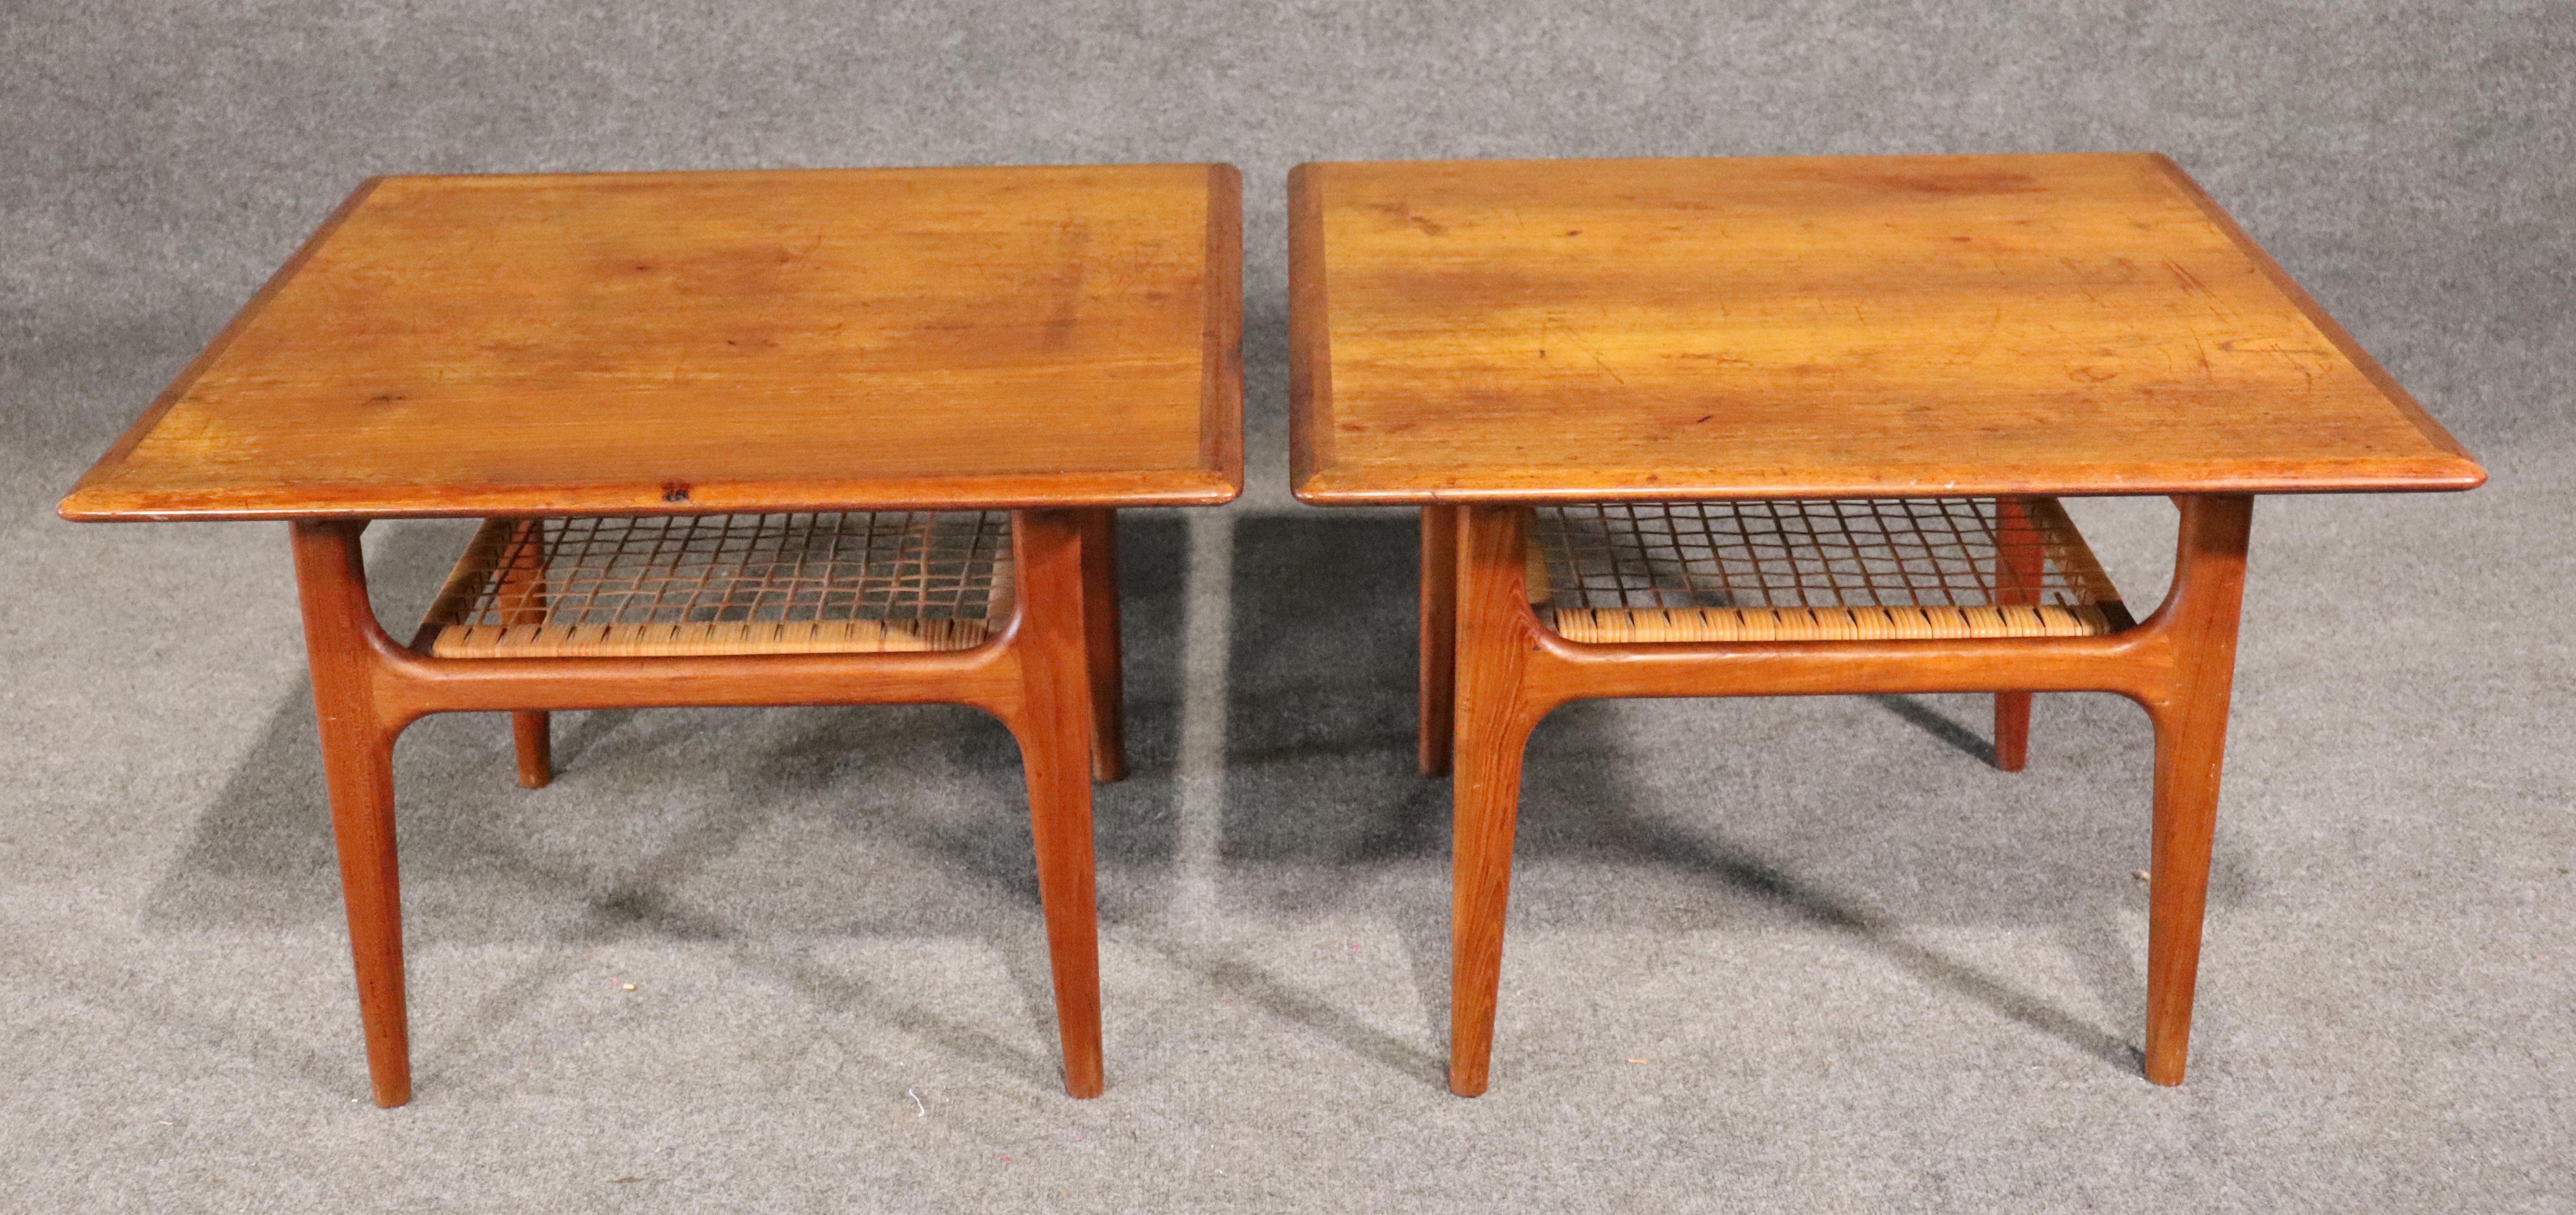 Danish maker Trioh designed tables with warm teak grain and woven shelf. Tapered legs and makers stamp underneath.
Please confirm location.